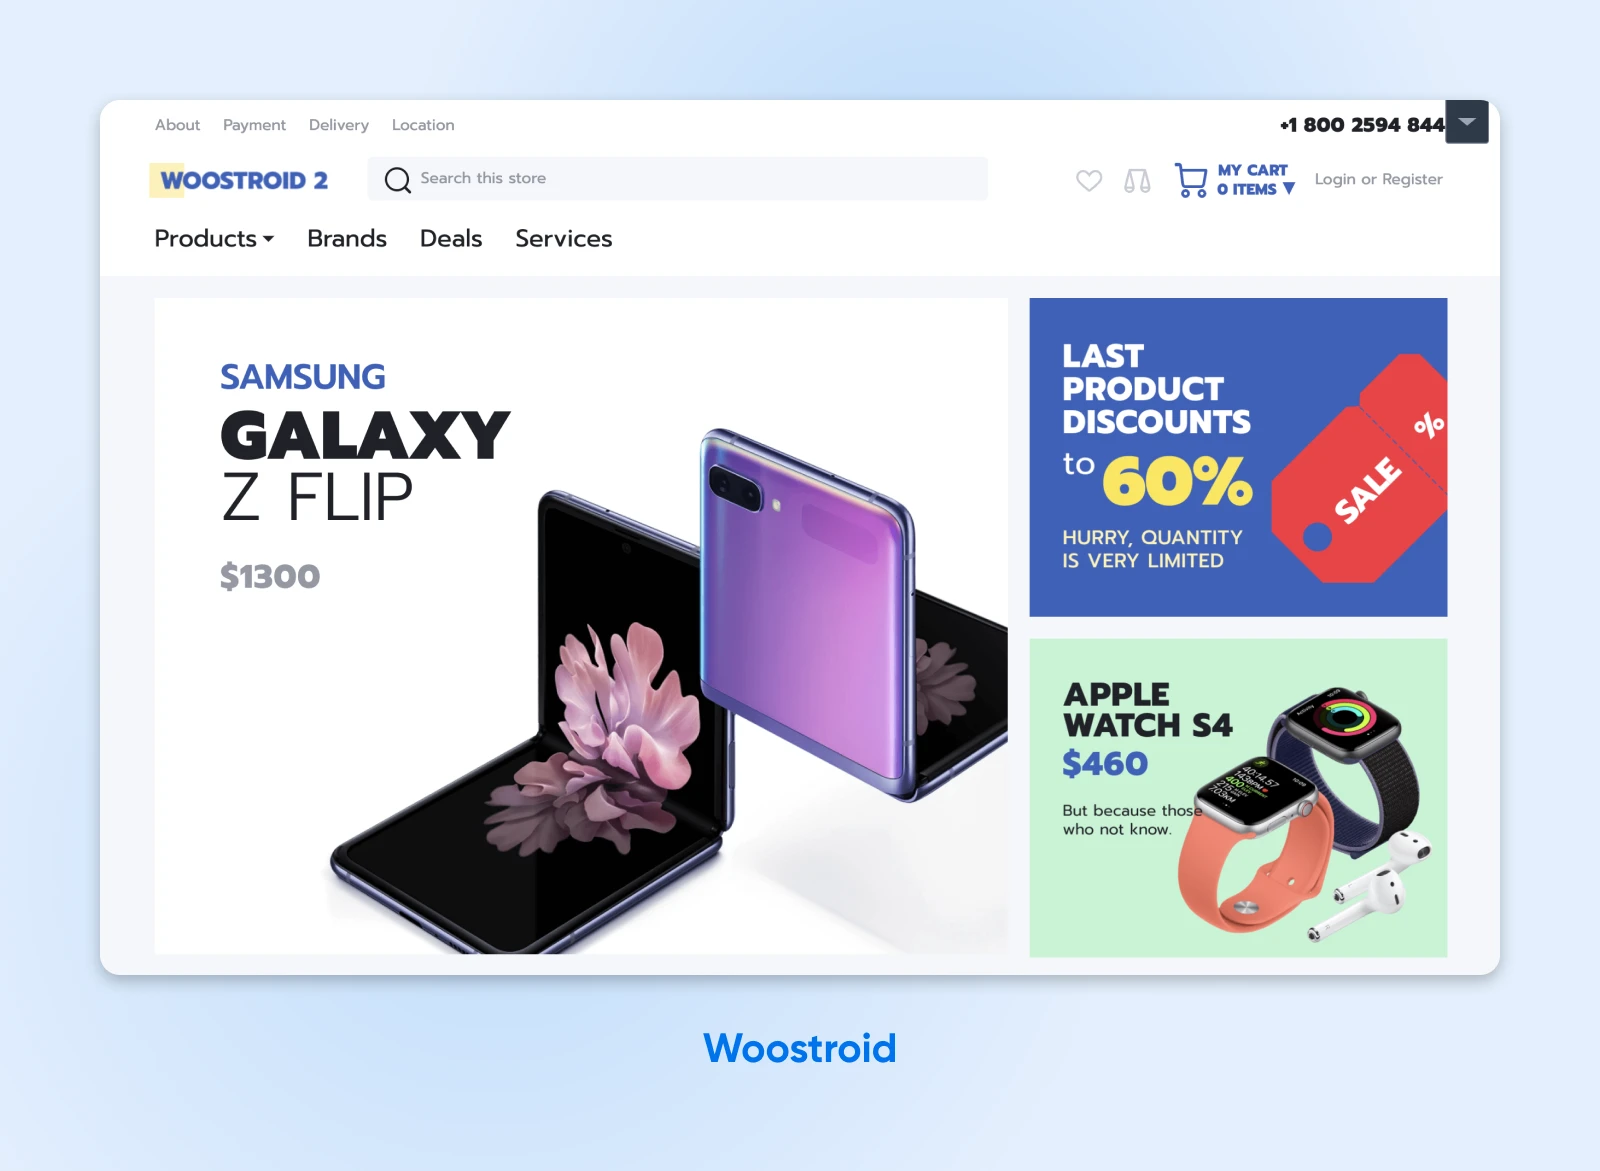 Woostroid 2 WooCommerce theme with product offers for Samsung Galaxy Z Flip and Apple Watch, and a search bar for navigation